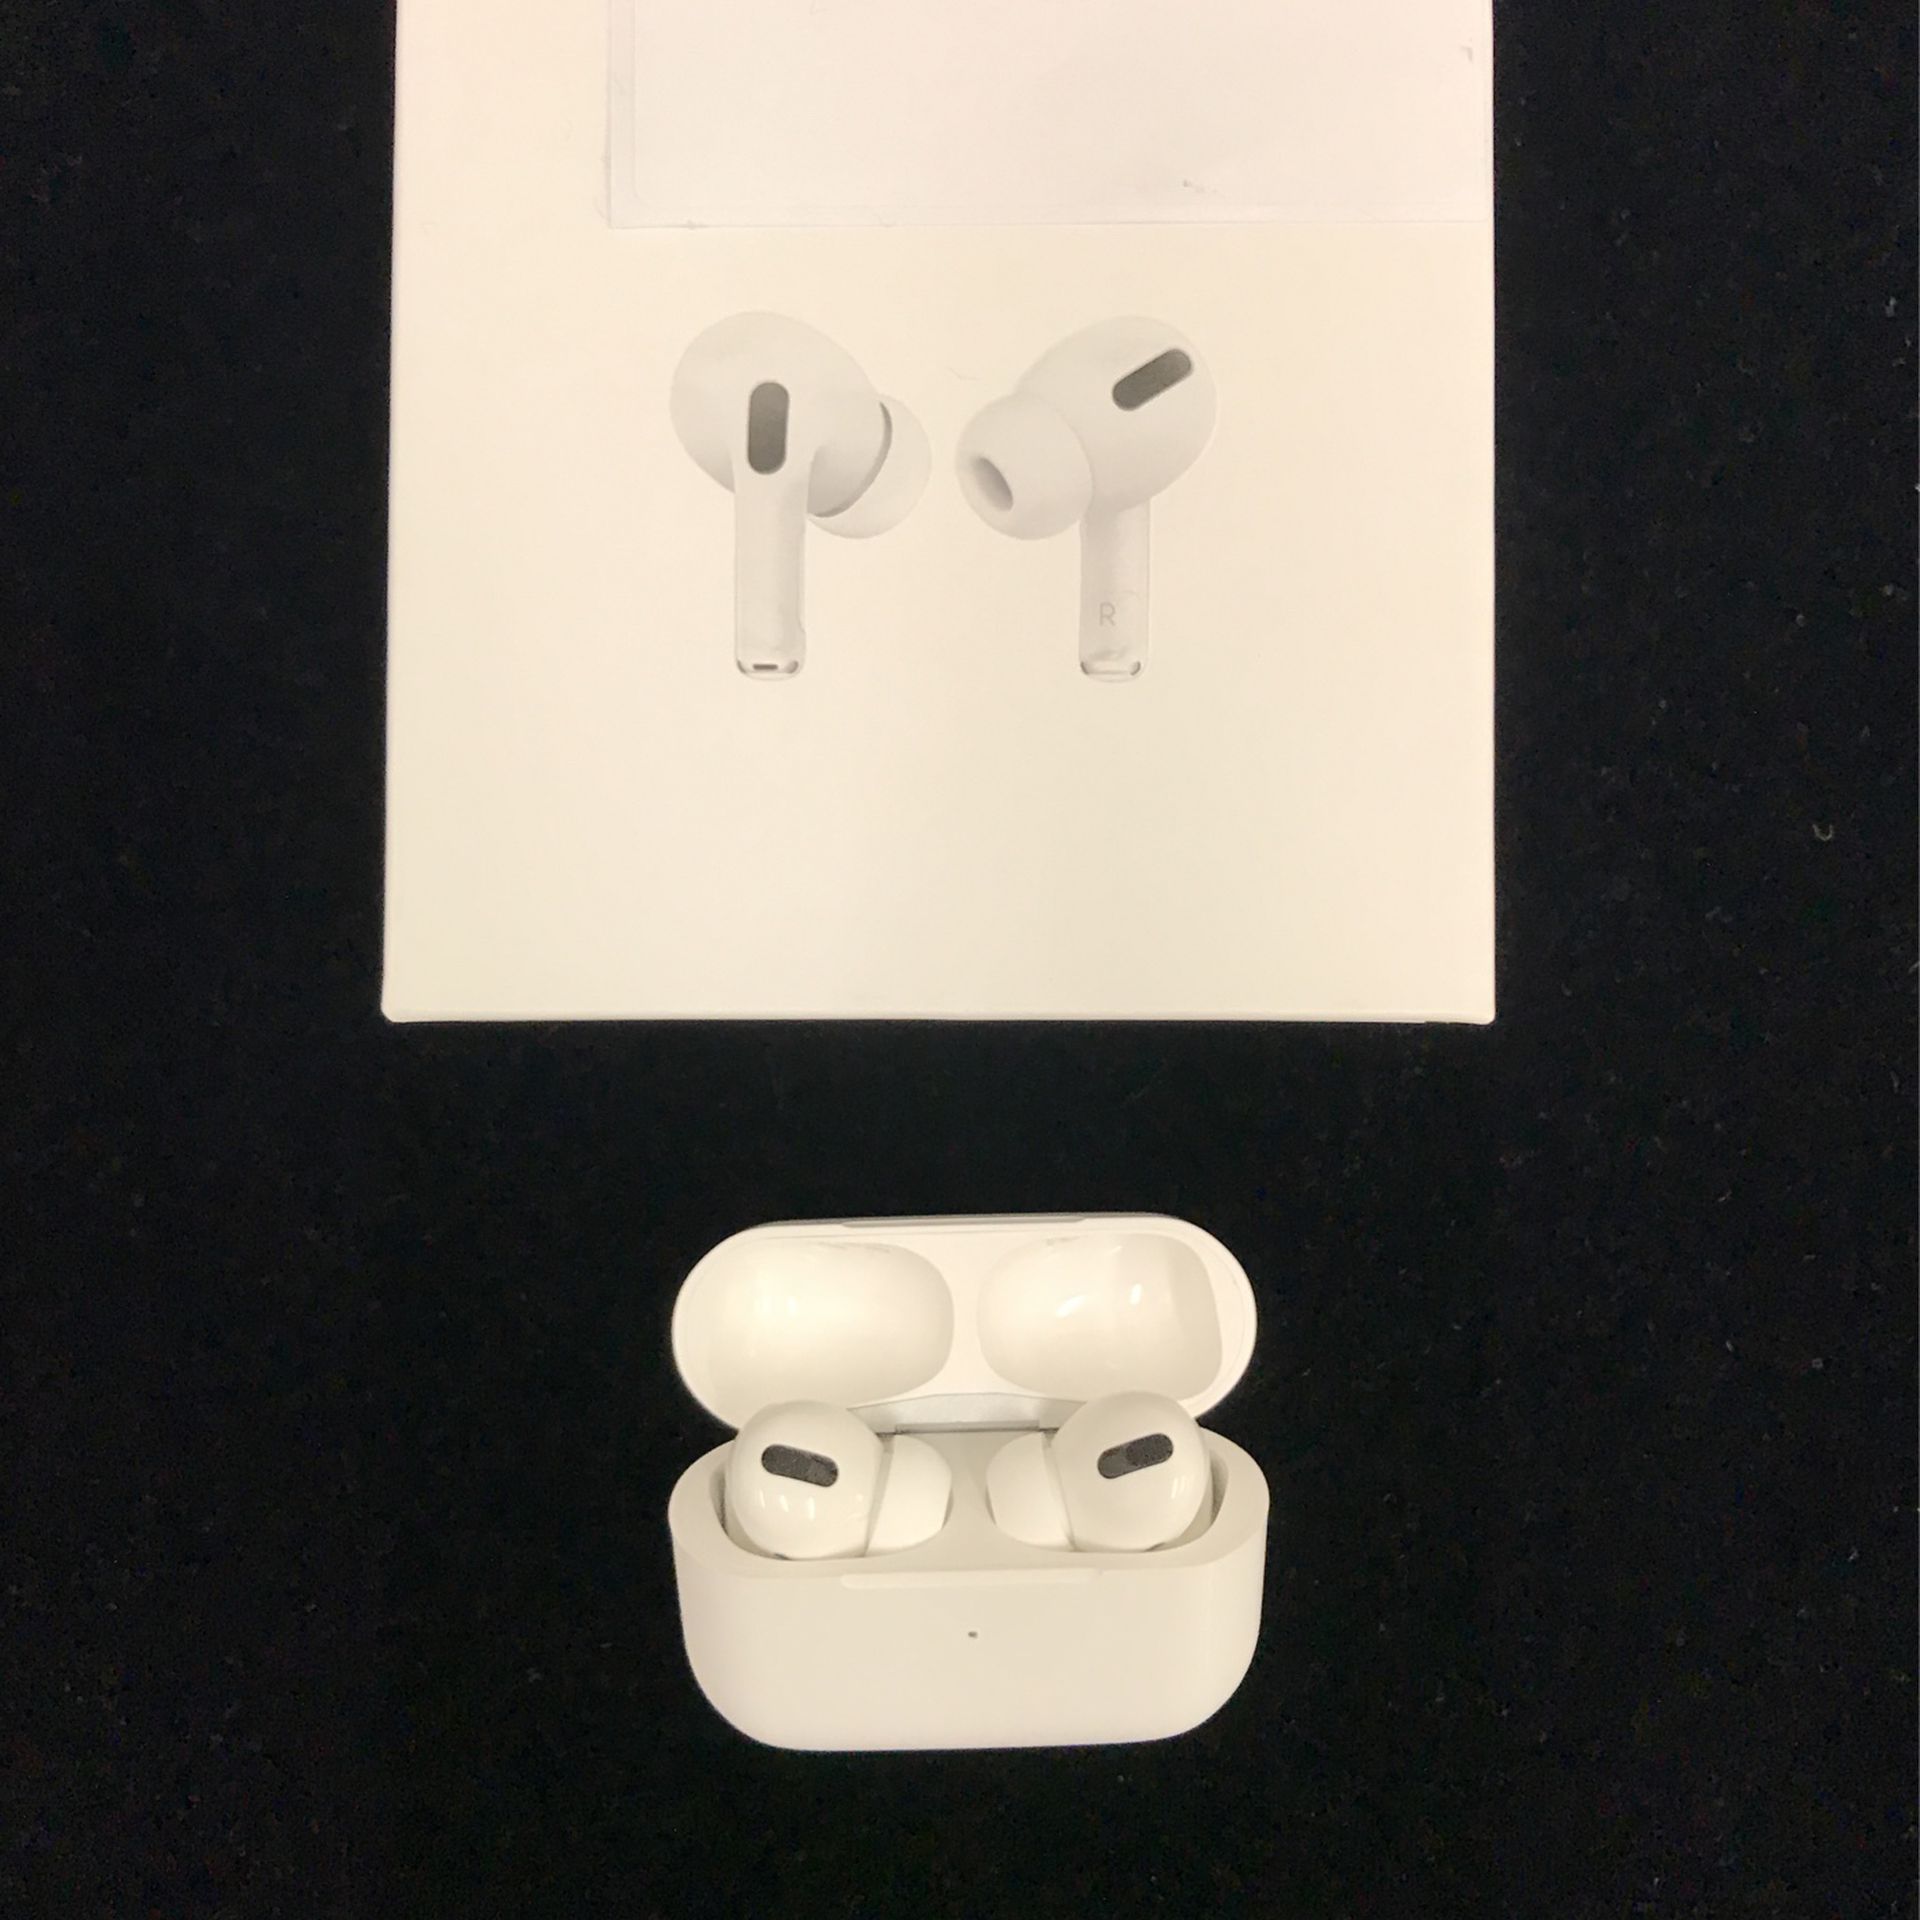 APPLE AIRPOD PRO EARBUDS 